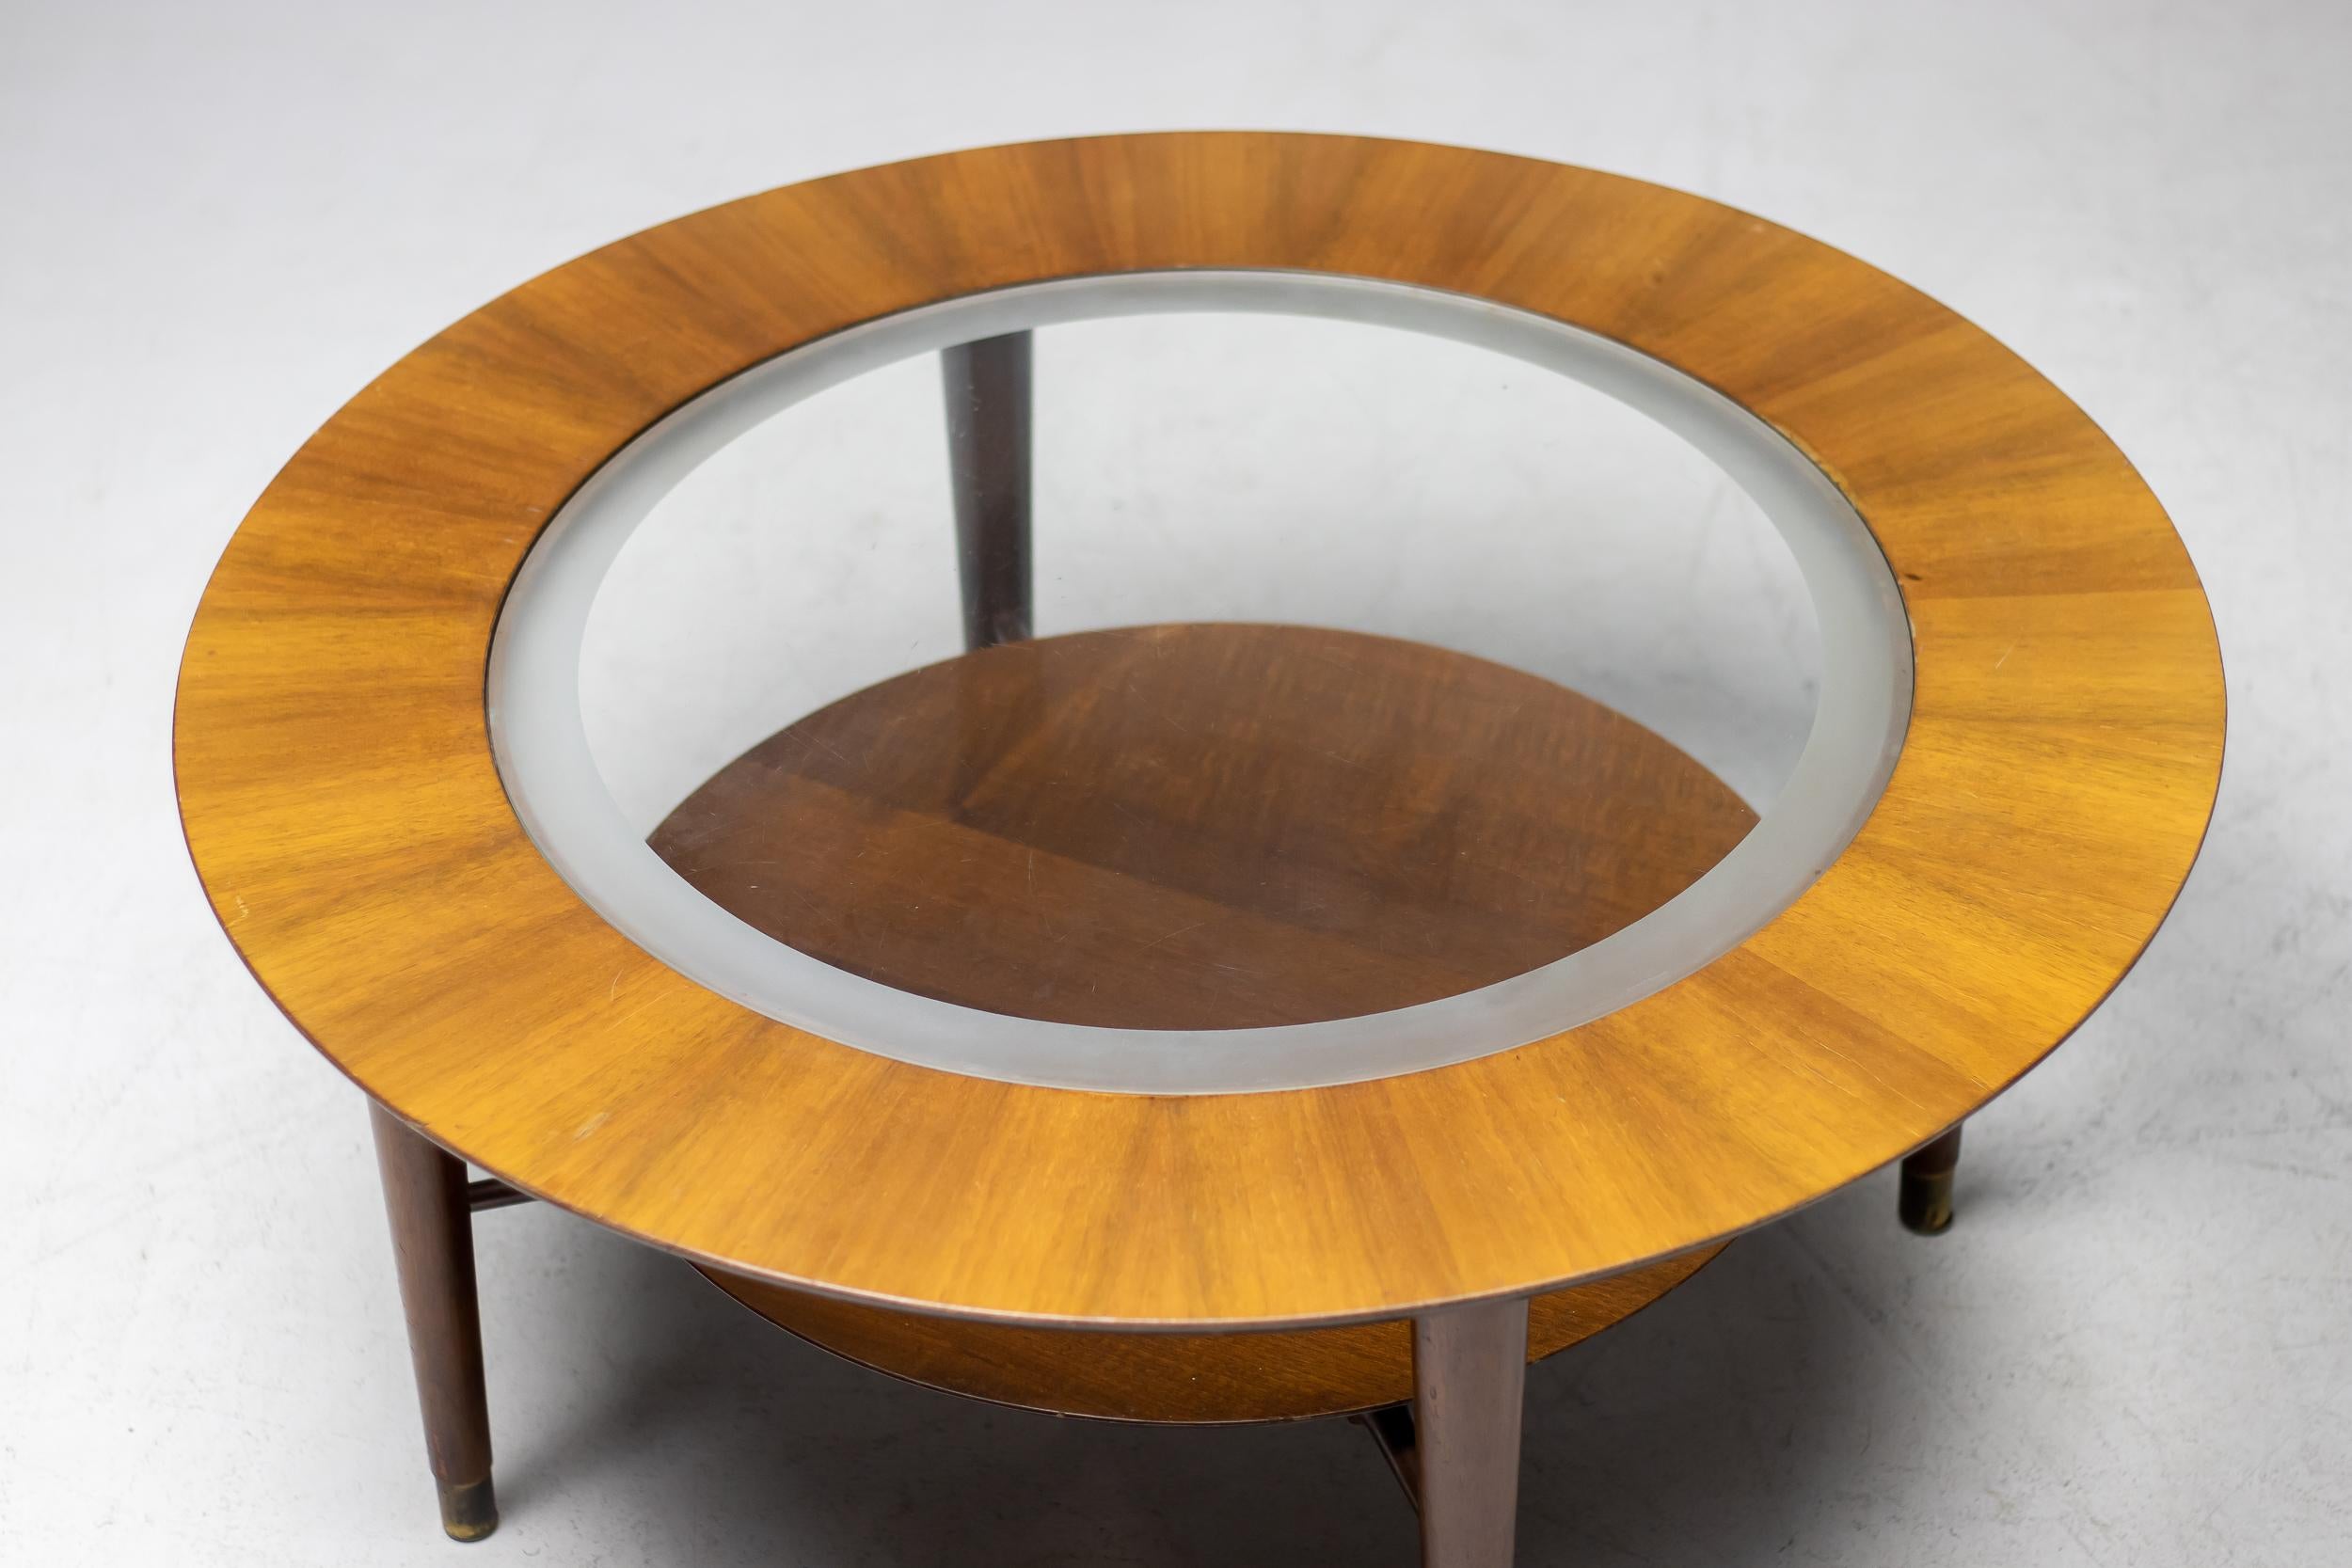 Beautiful coffee table in walnut and glass with brass feet.
The design and craftsmanship resembles the beautiful creations of Gio Ponti and Ico Parisi.

Provenance:
A mid-century modern villa in the south of Italy.